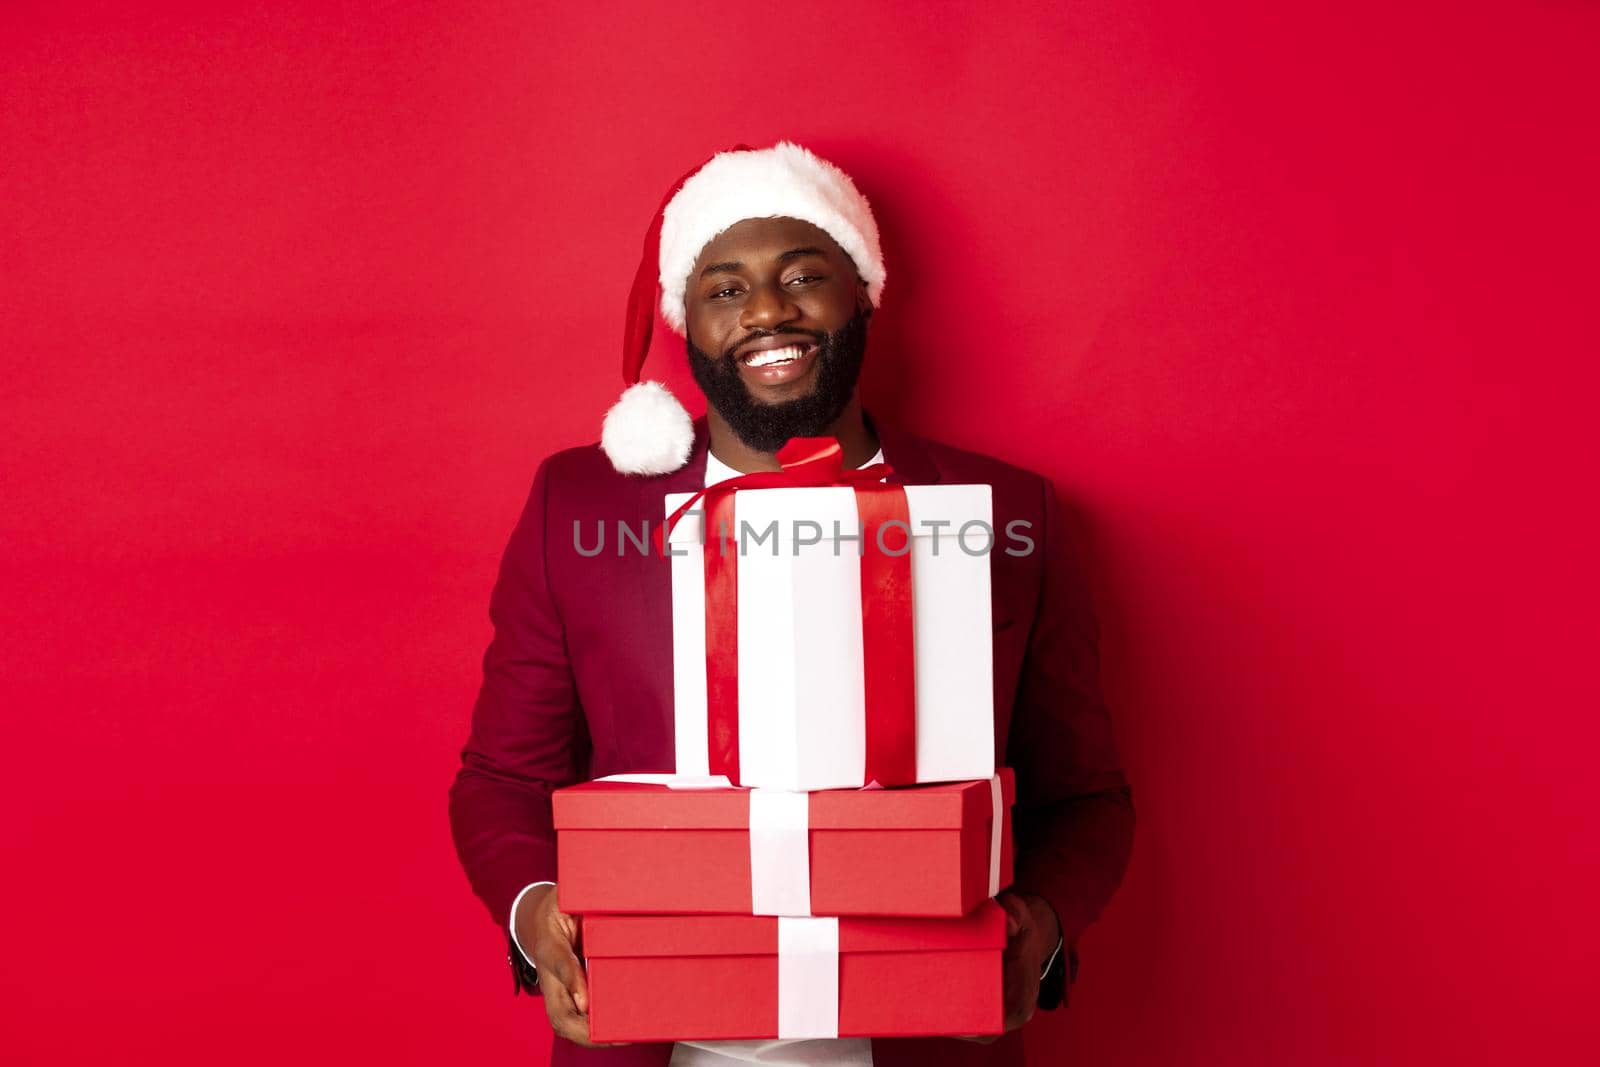 Christmas, New Year and shopping concept. Happy Black man in santa hat and blazer holding xmas presents, bring gifts and smiling, standing against red background.